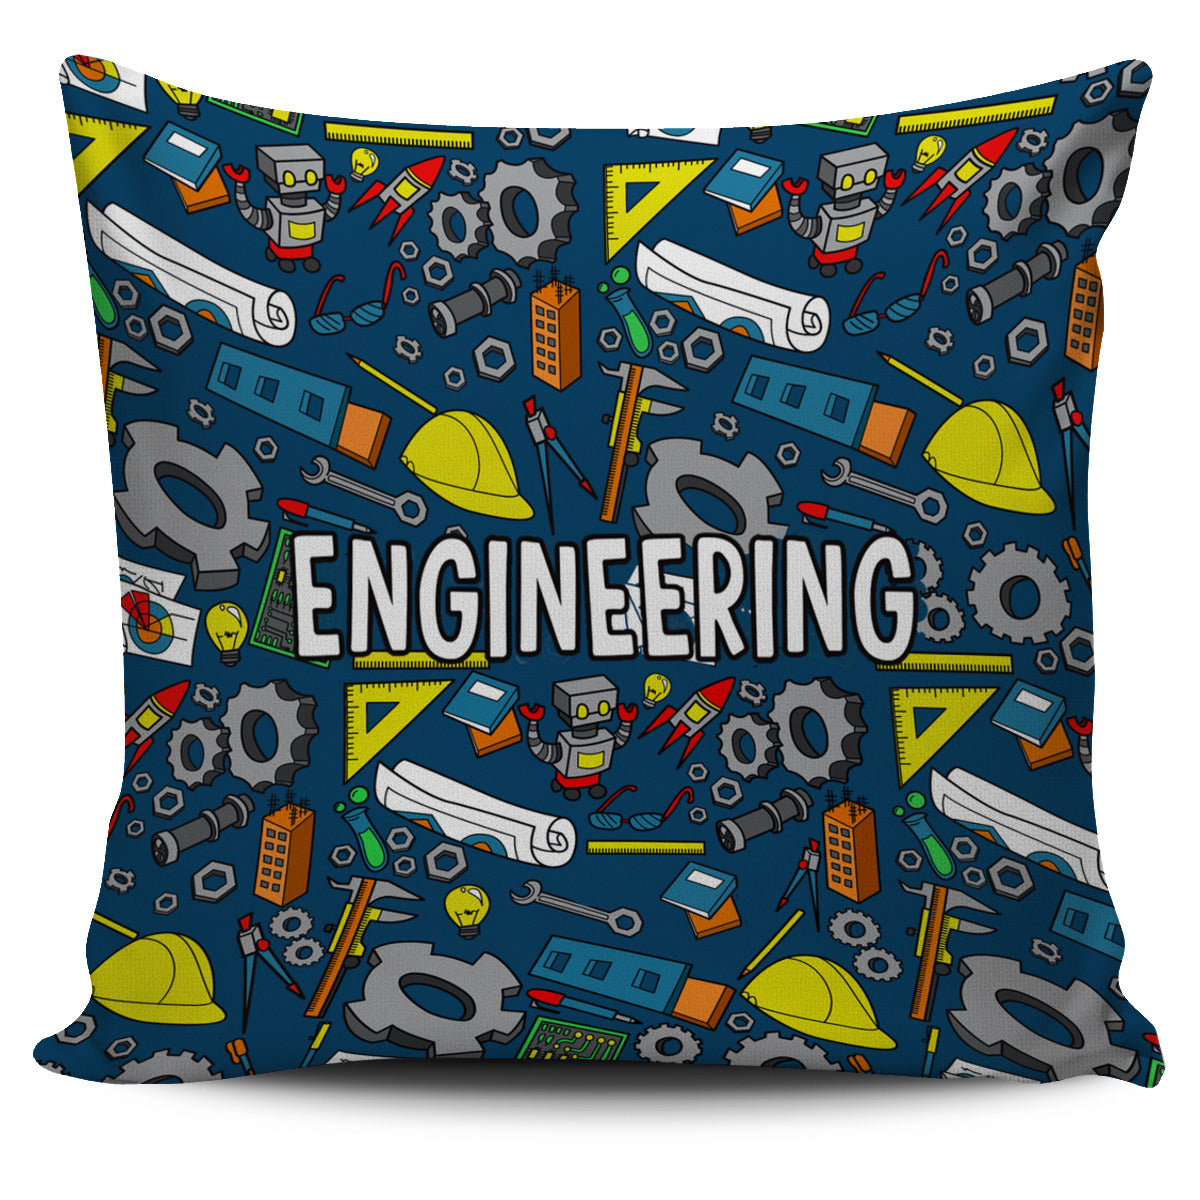 Engineering Pillow Cover